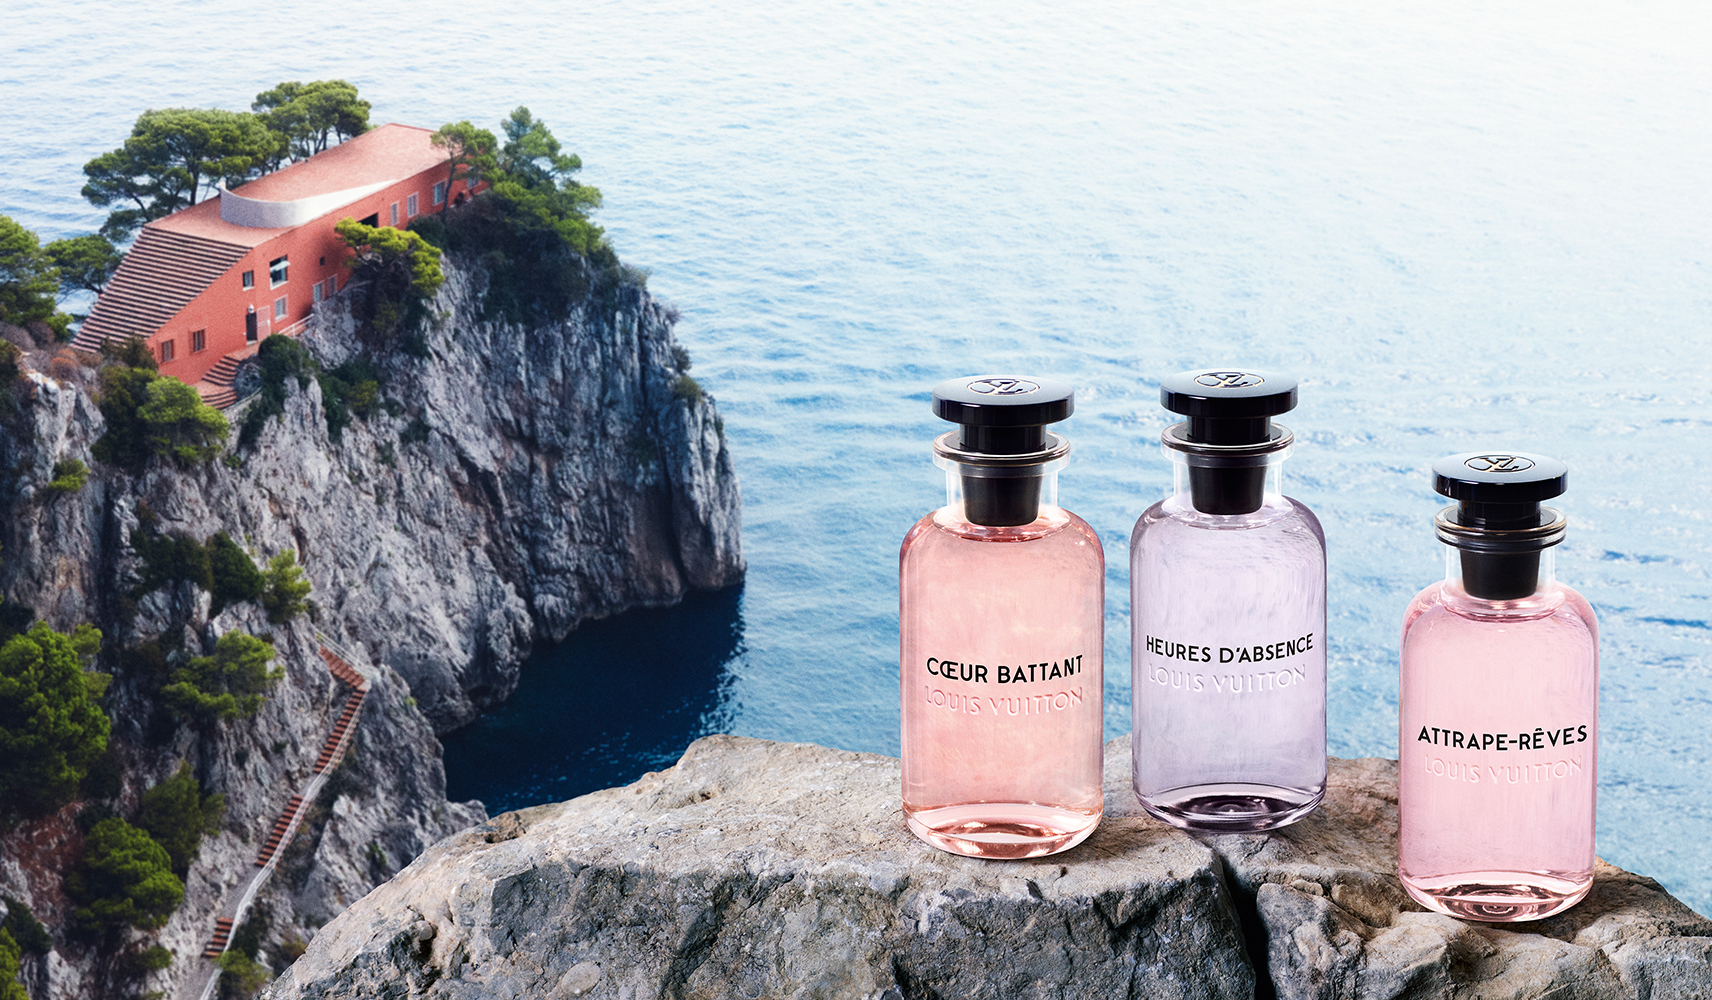 Travel Spray Heures d'Absence - Perfumes - Collections